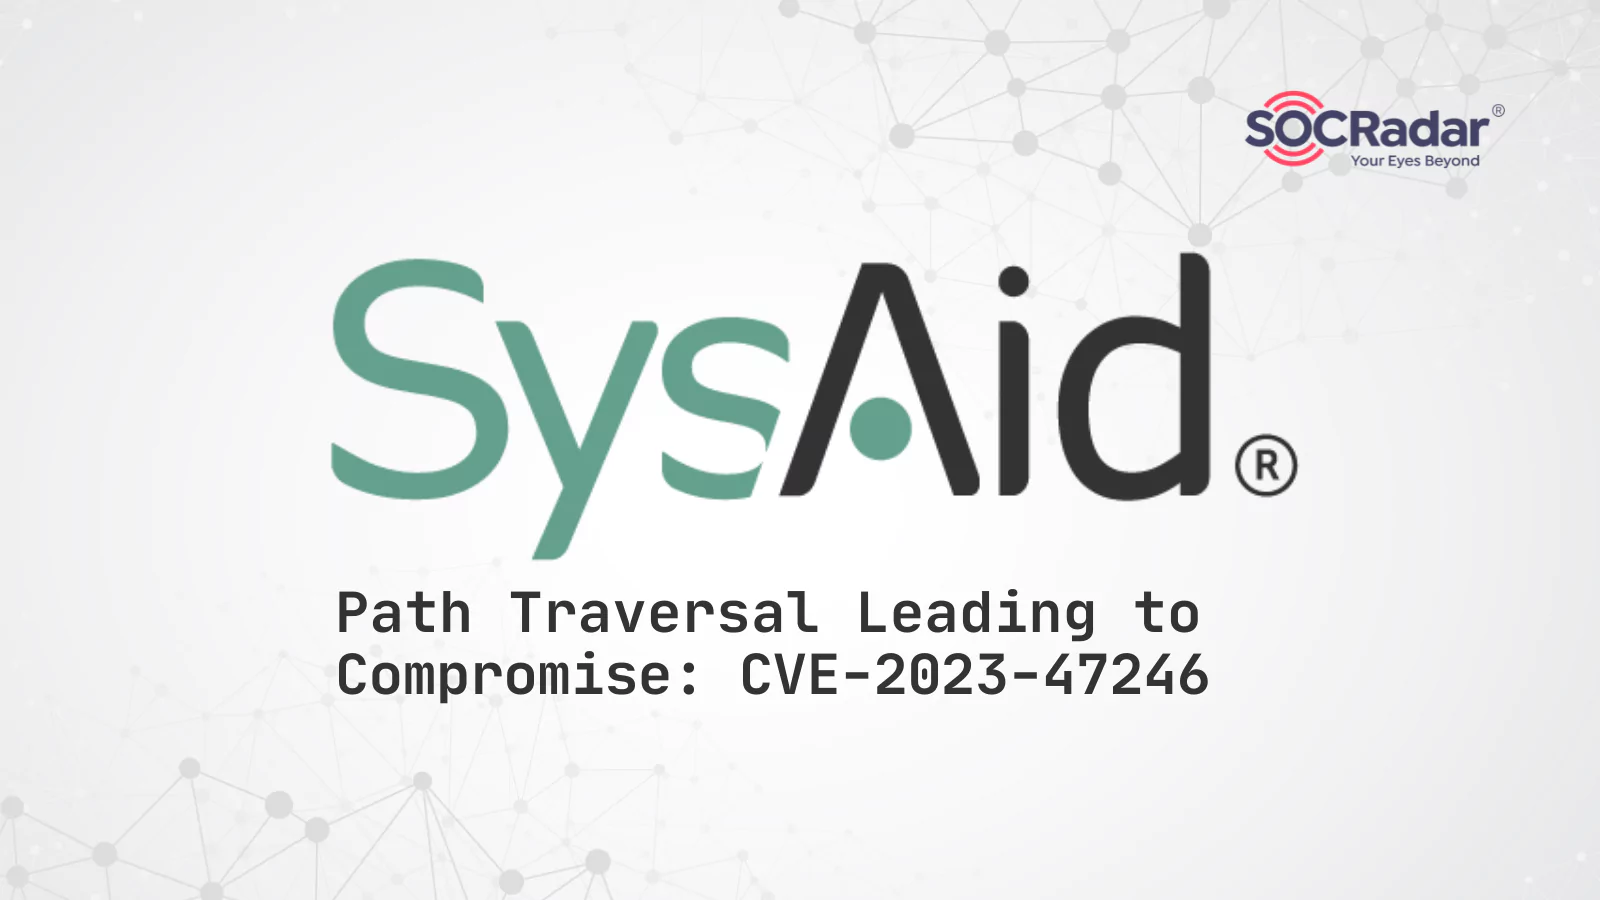 SOCRadar® Cyber Intelligence Inc. | Path Traversal Leading to Compromise: SysAid On-Prem Software CVE-2023-47246 Vulnerability